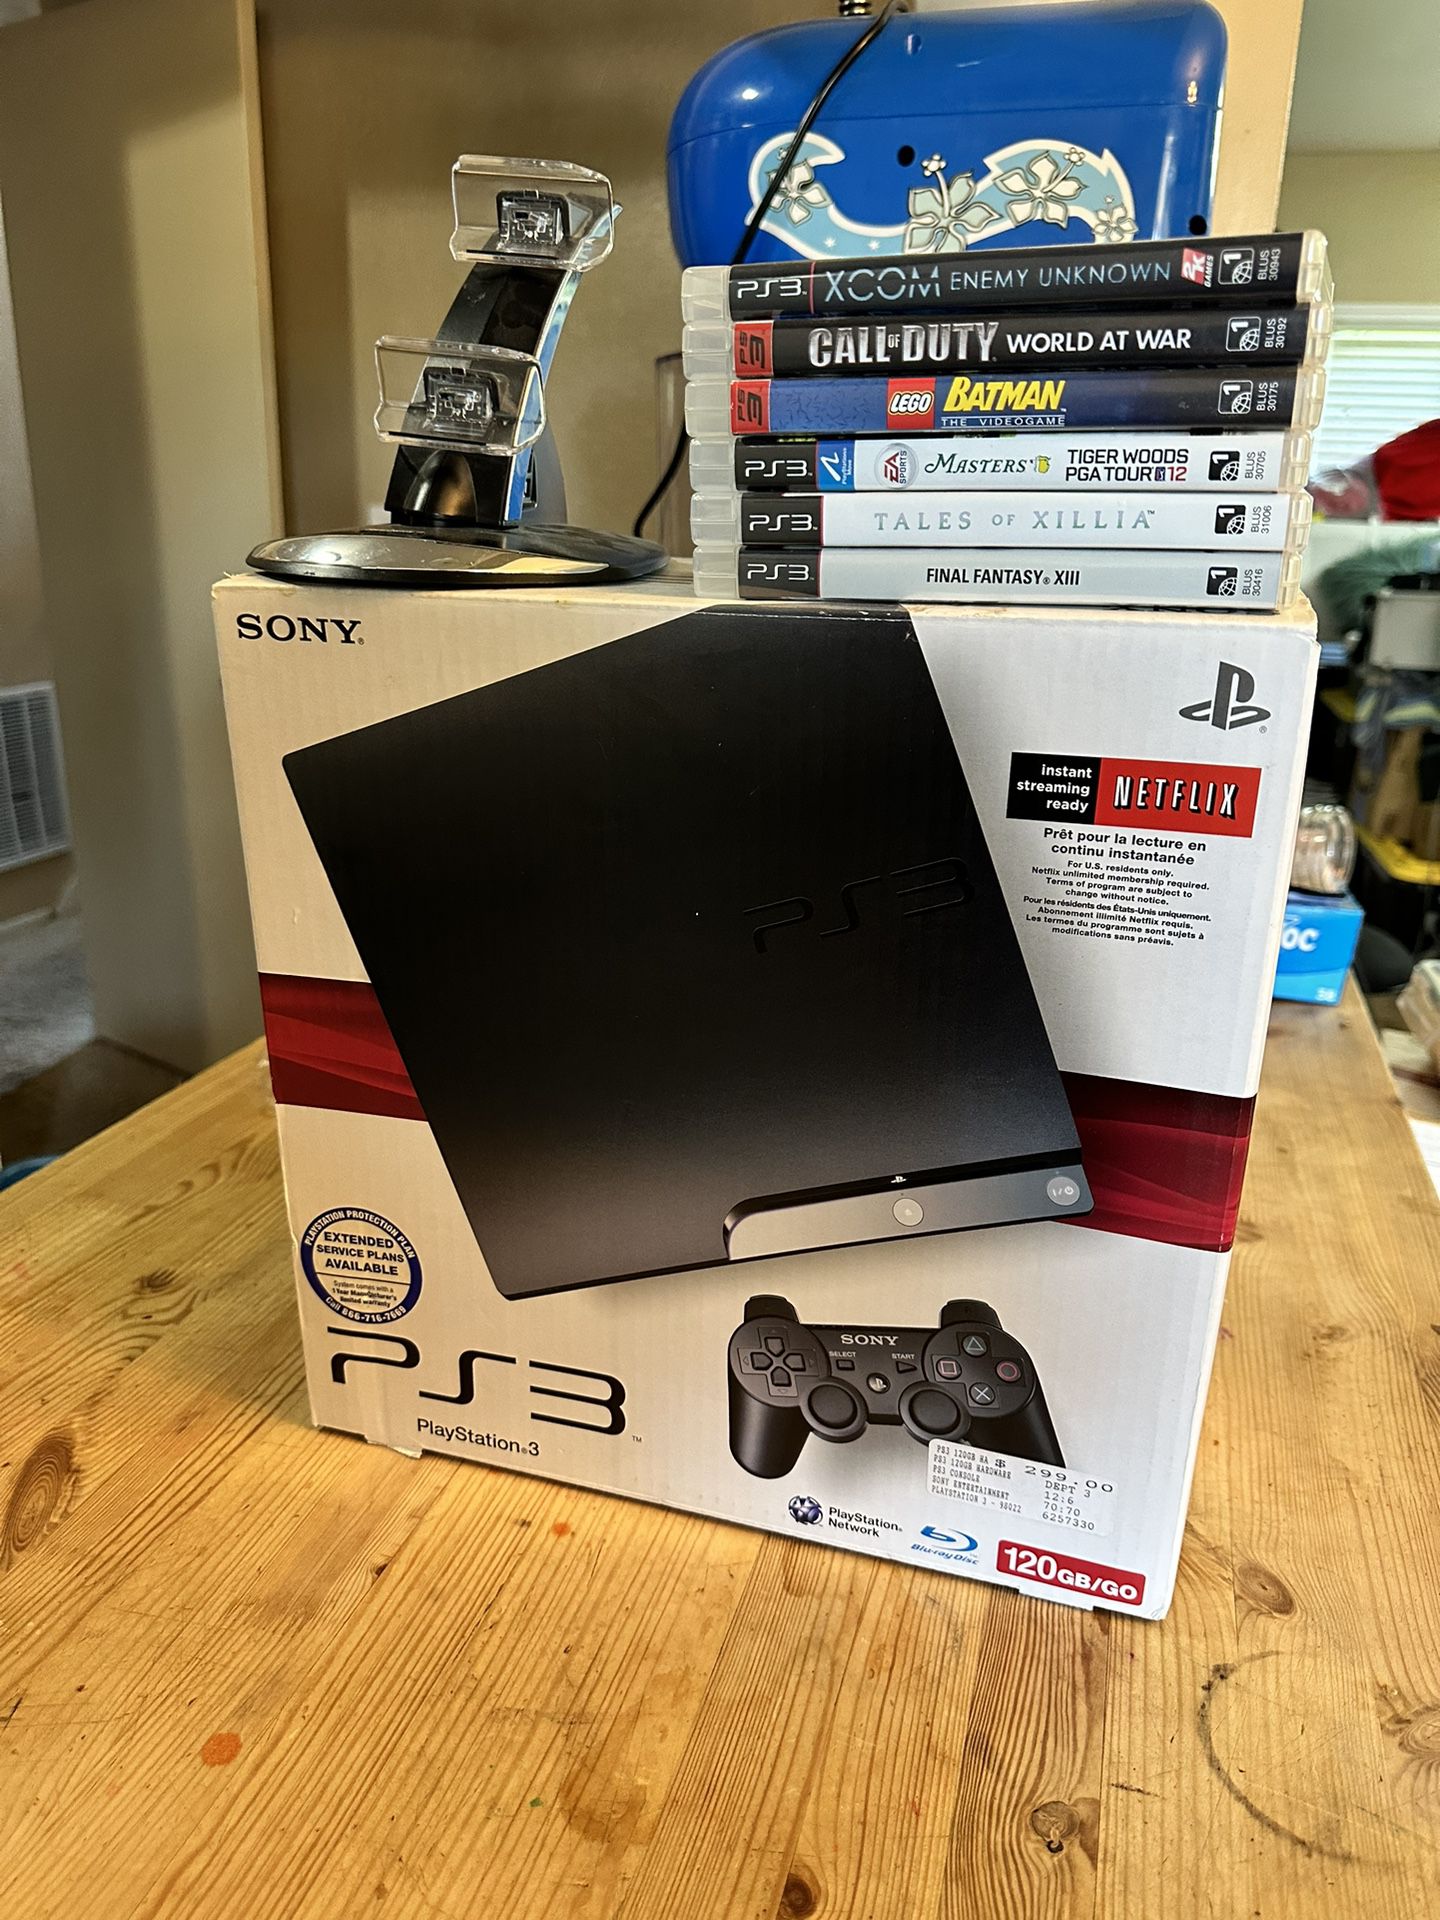 PS3 In Original Box With 6 Games 